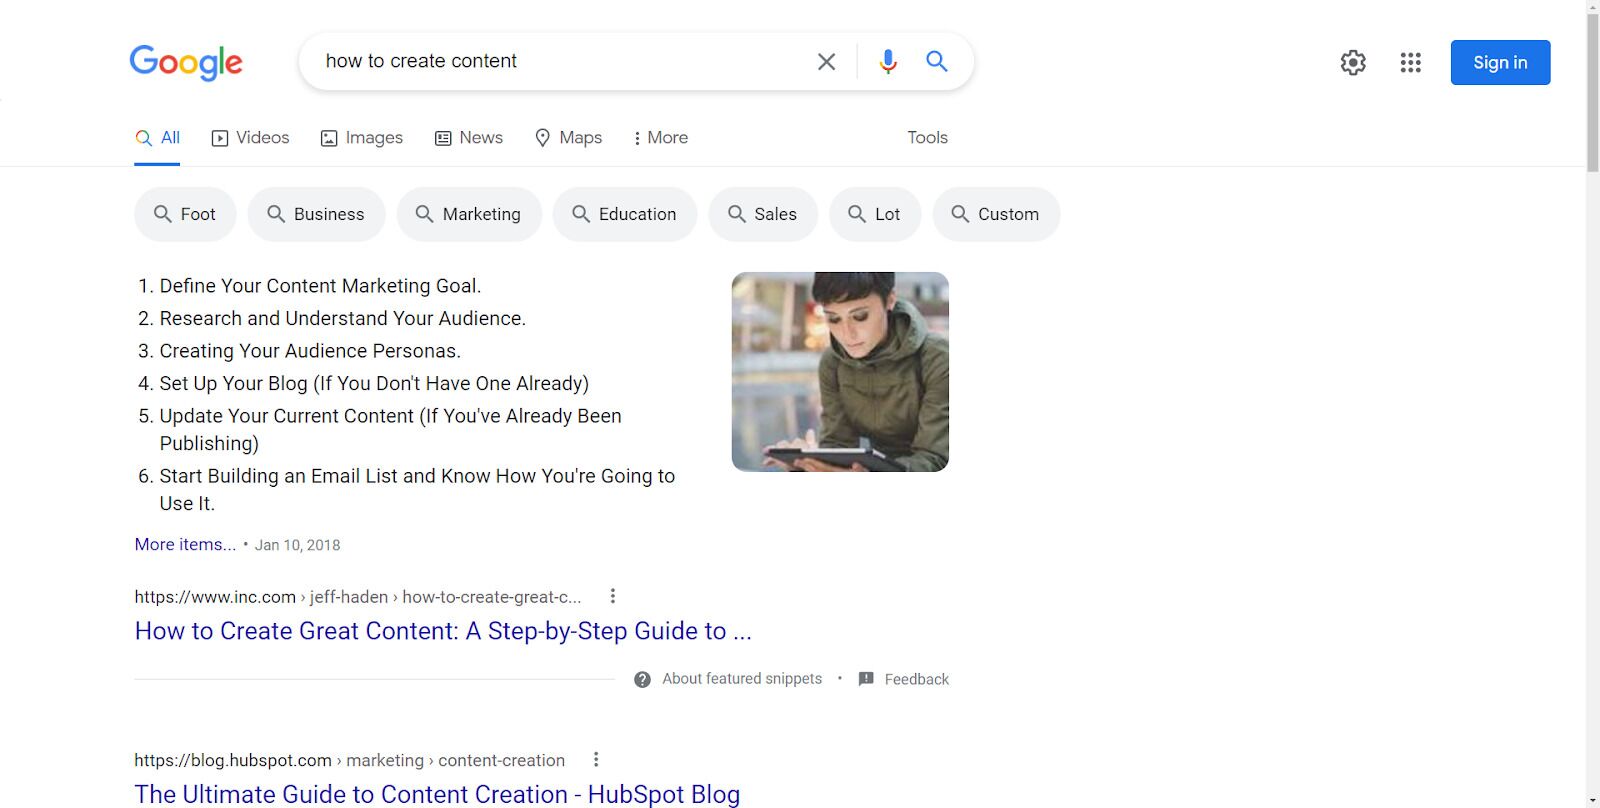 Search for "how to create content" showing a featured snippet